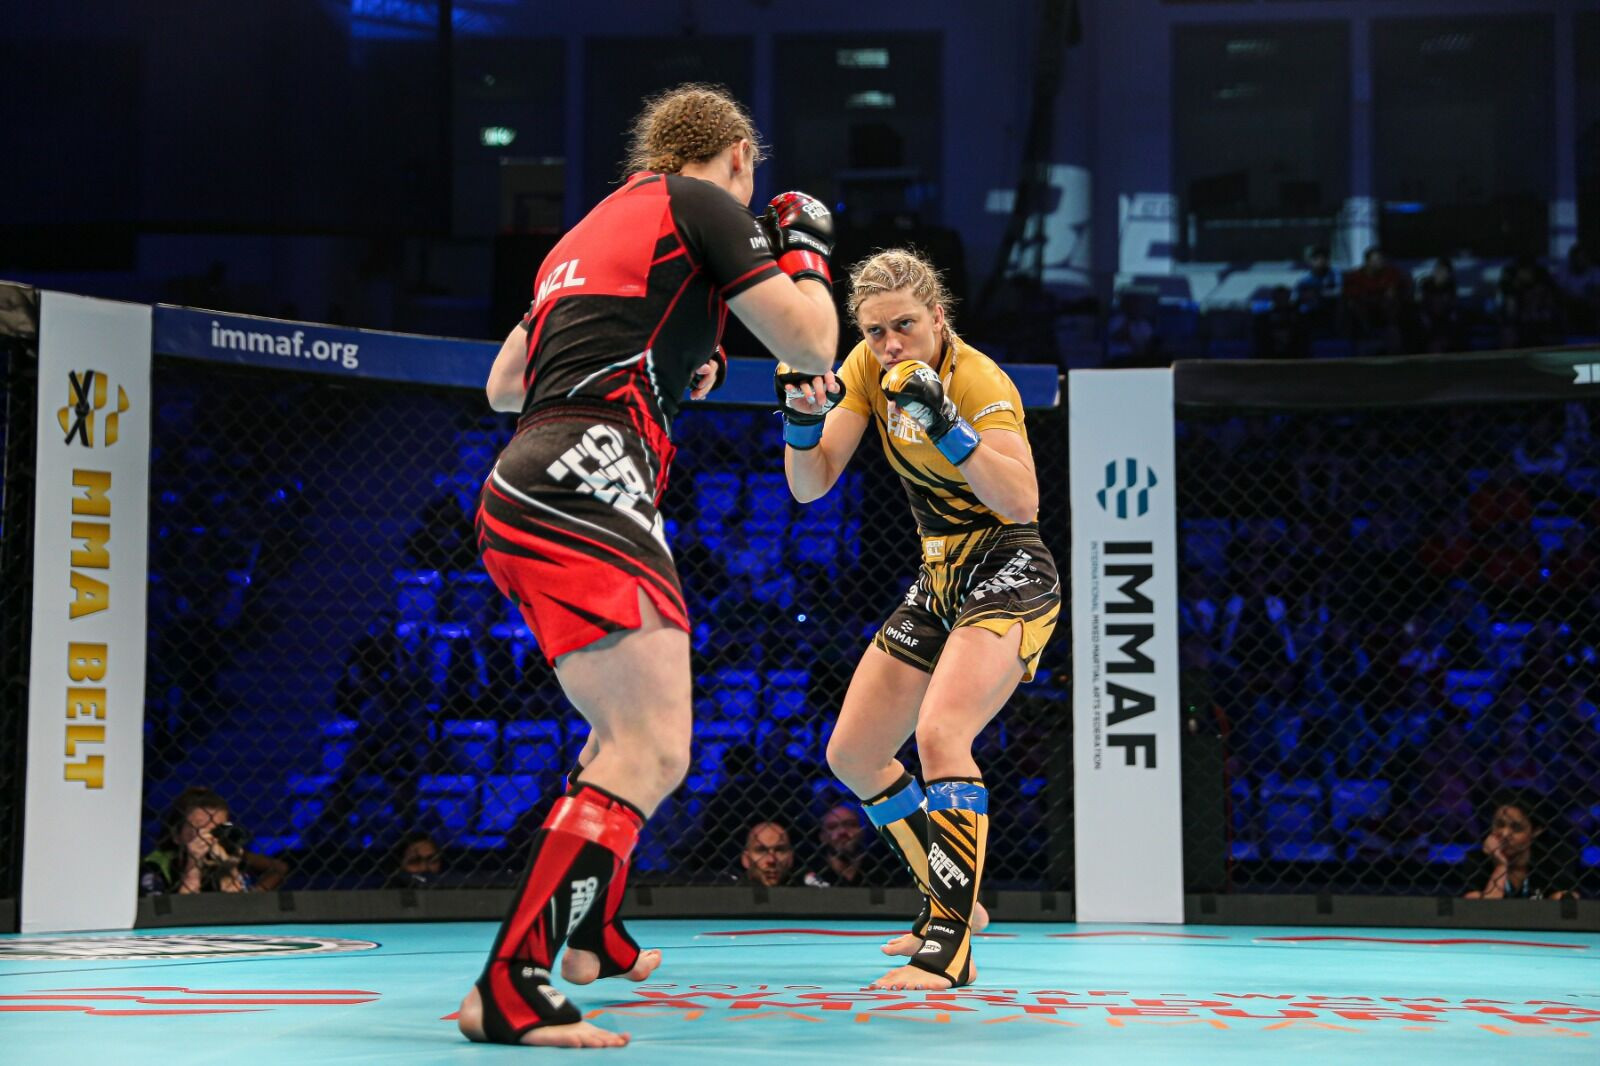 Michelle Montague, right, won Best Female Athlete and Best Performance ©IMMAF